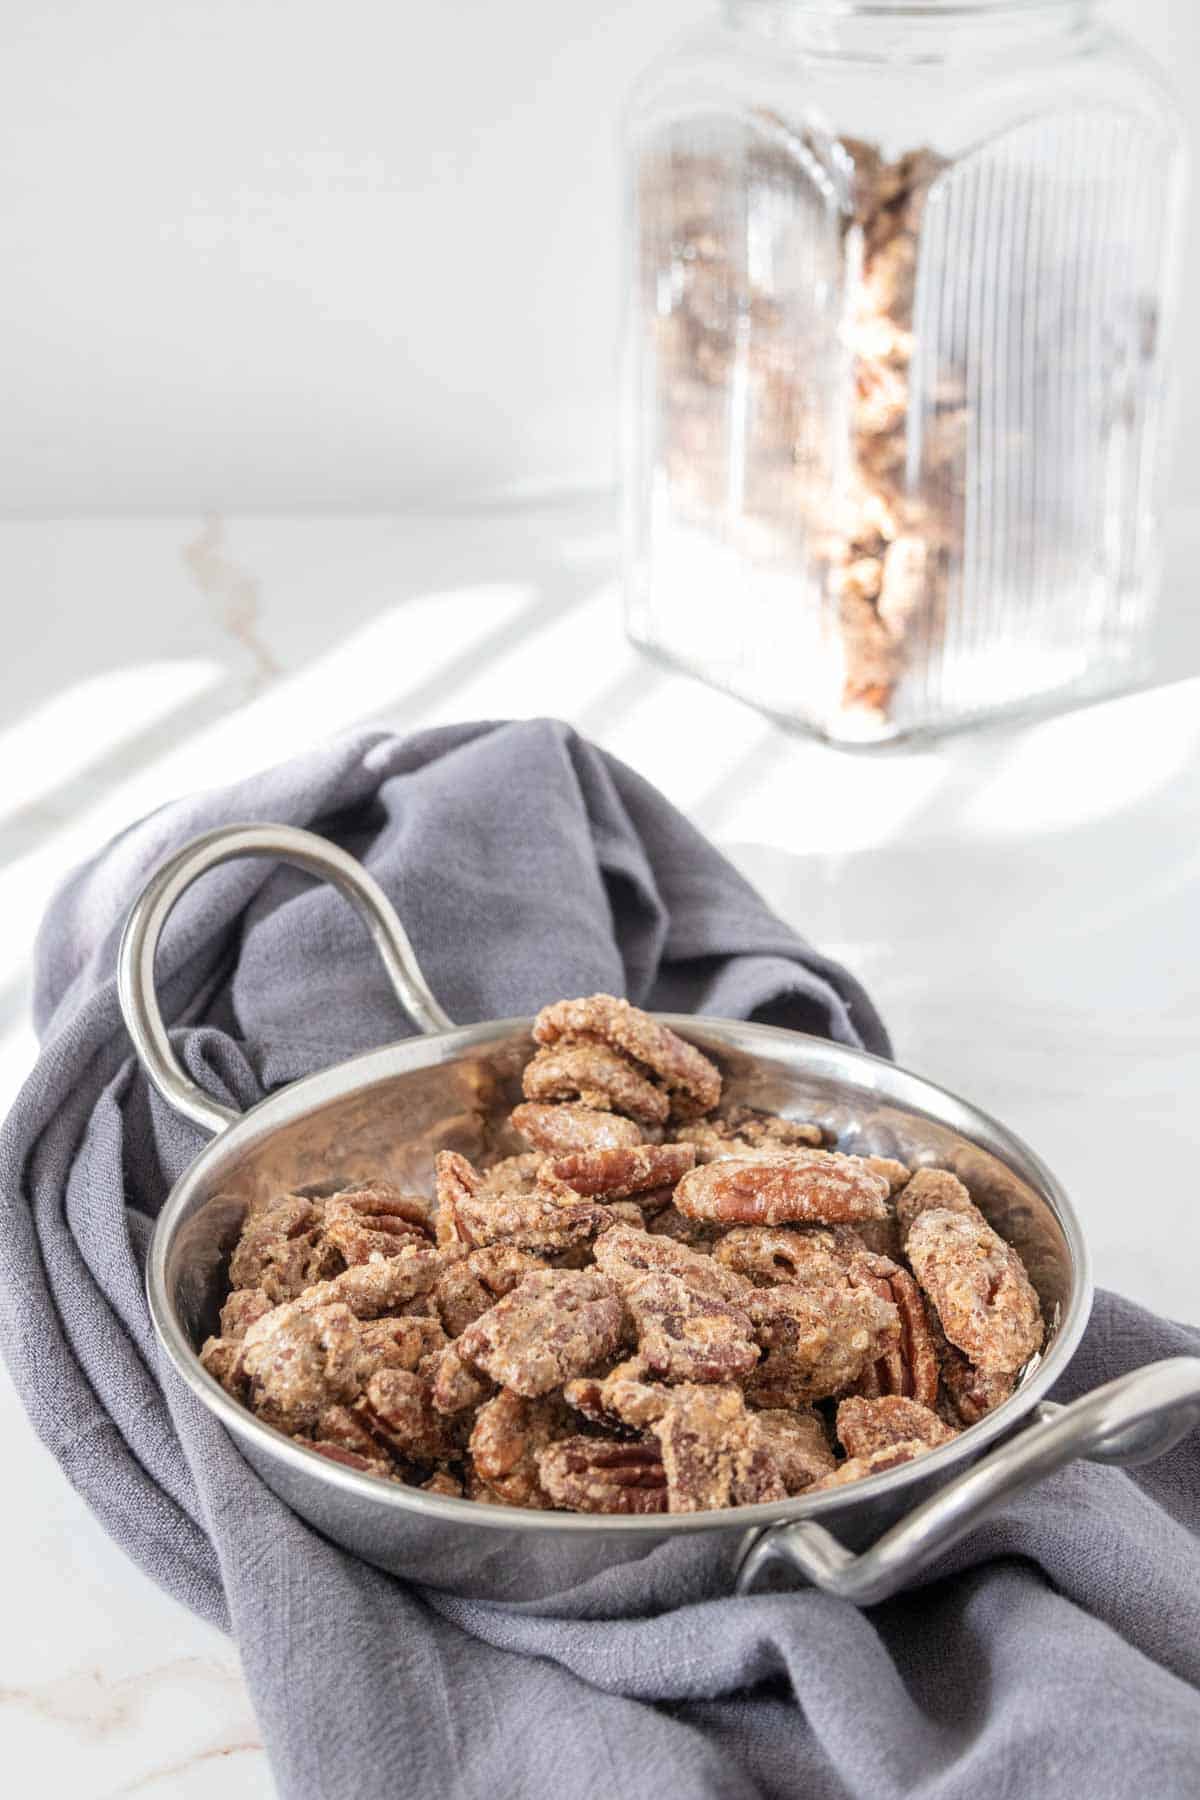 Bowl of candied pecans with glass container behind.